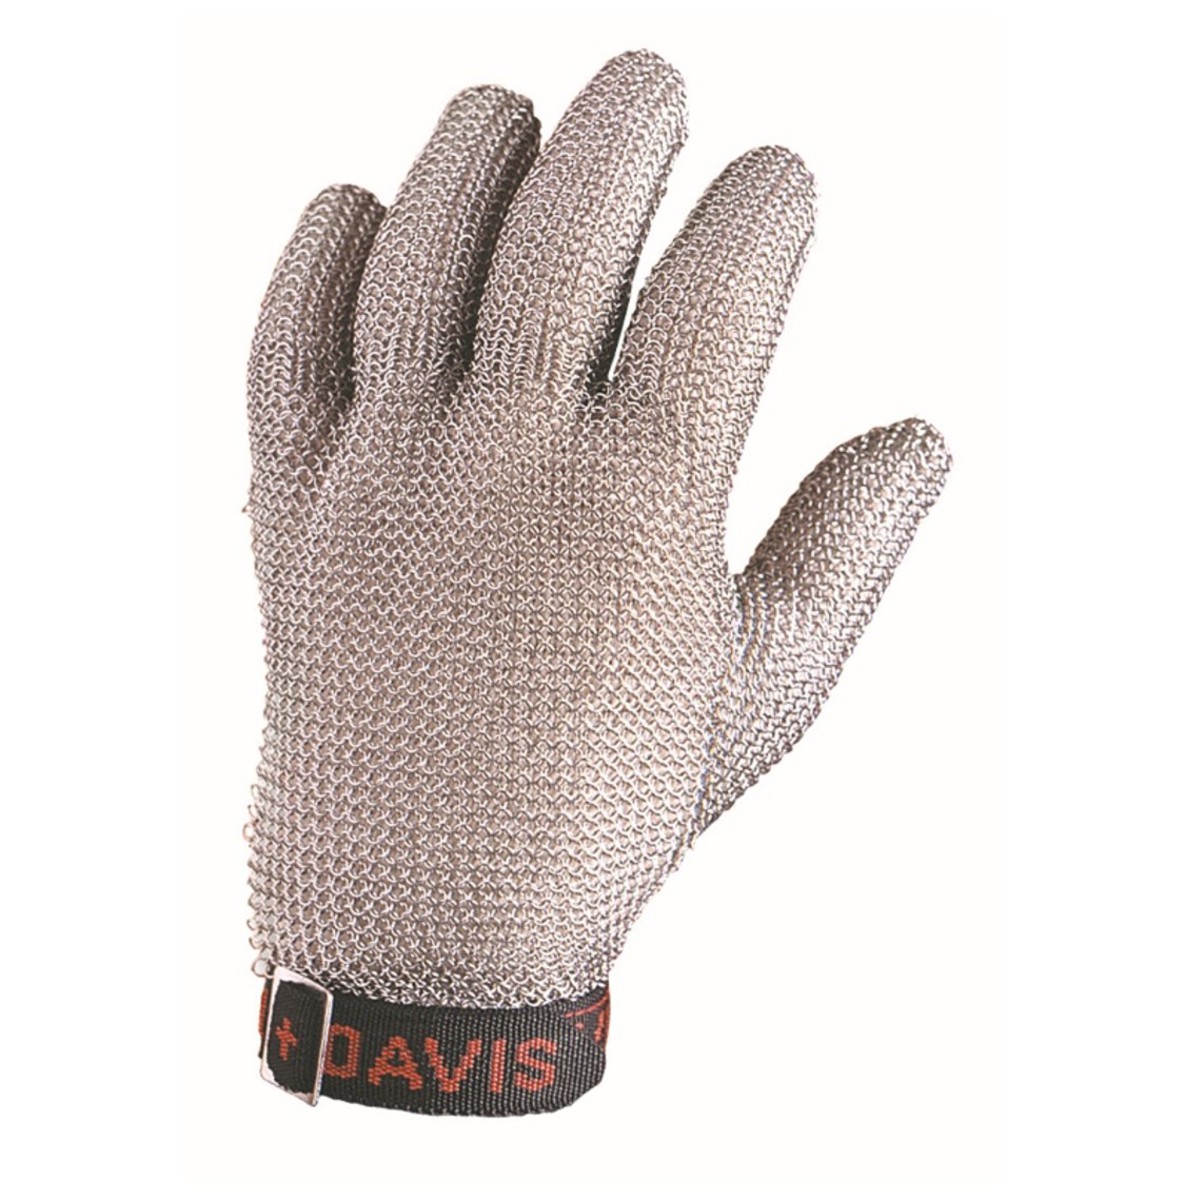 Honeywell Large Whiting + Davis® Stainless Steel Cut Resistant Gloves